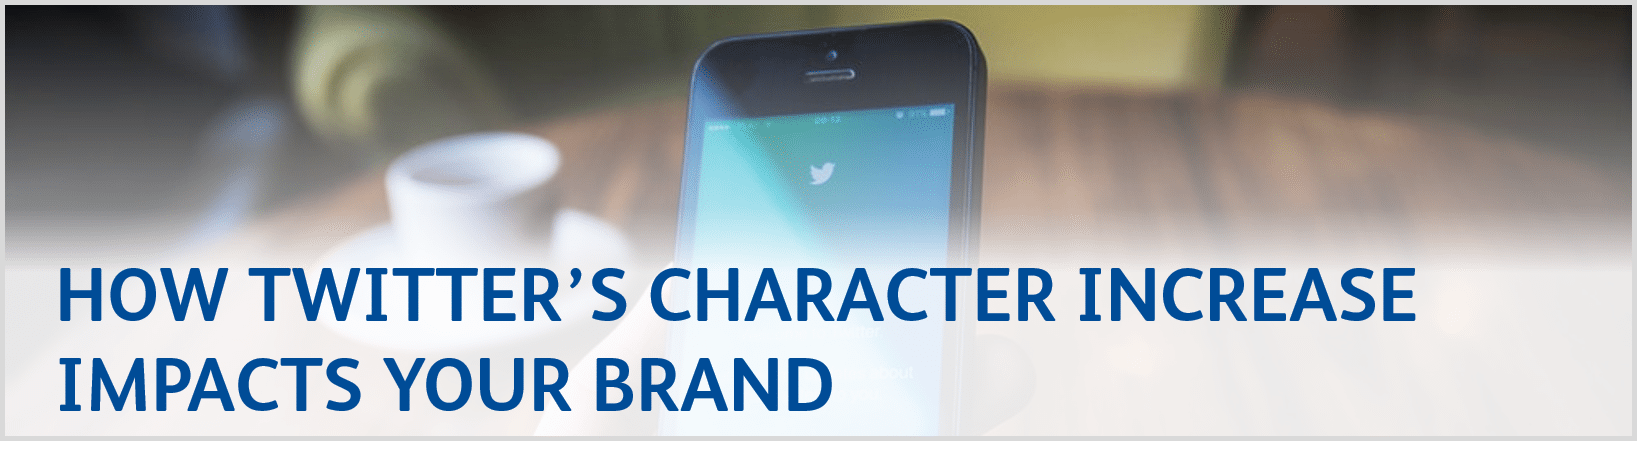 How Twitter's Character Increase Impacts Your Brand